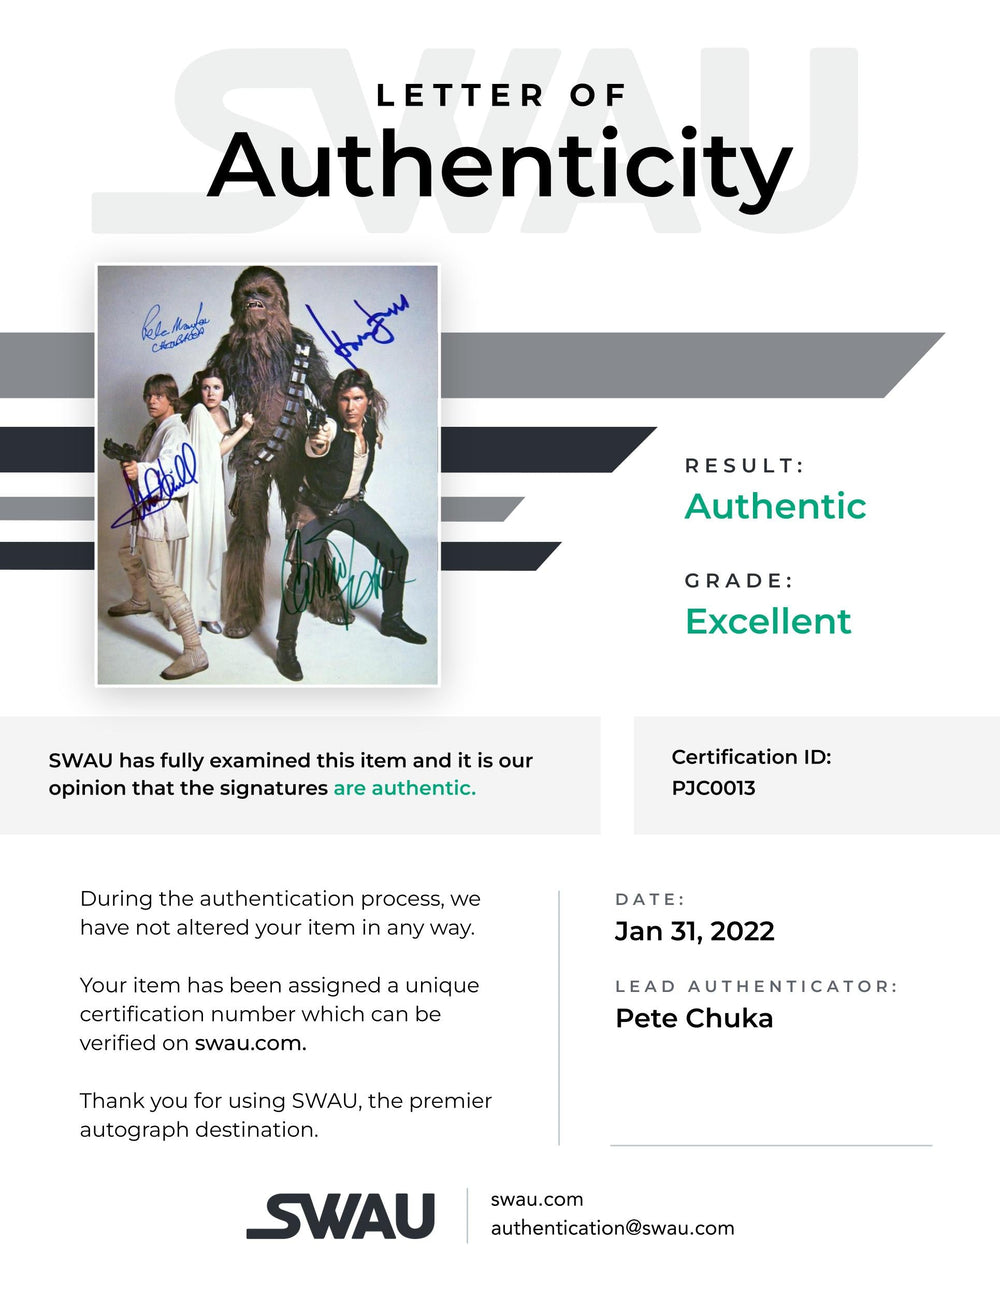 Letter of Authenticity